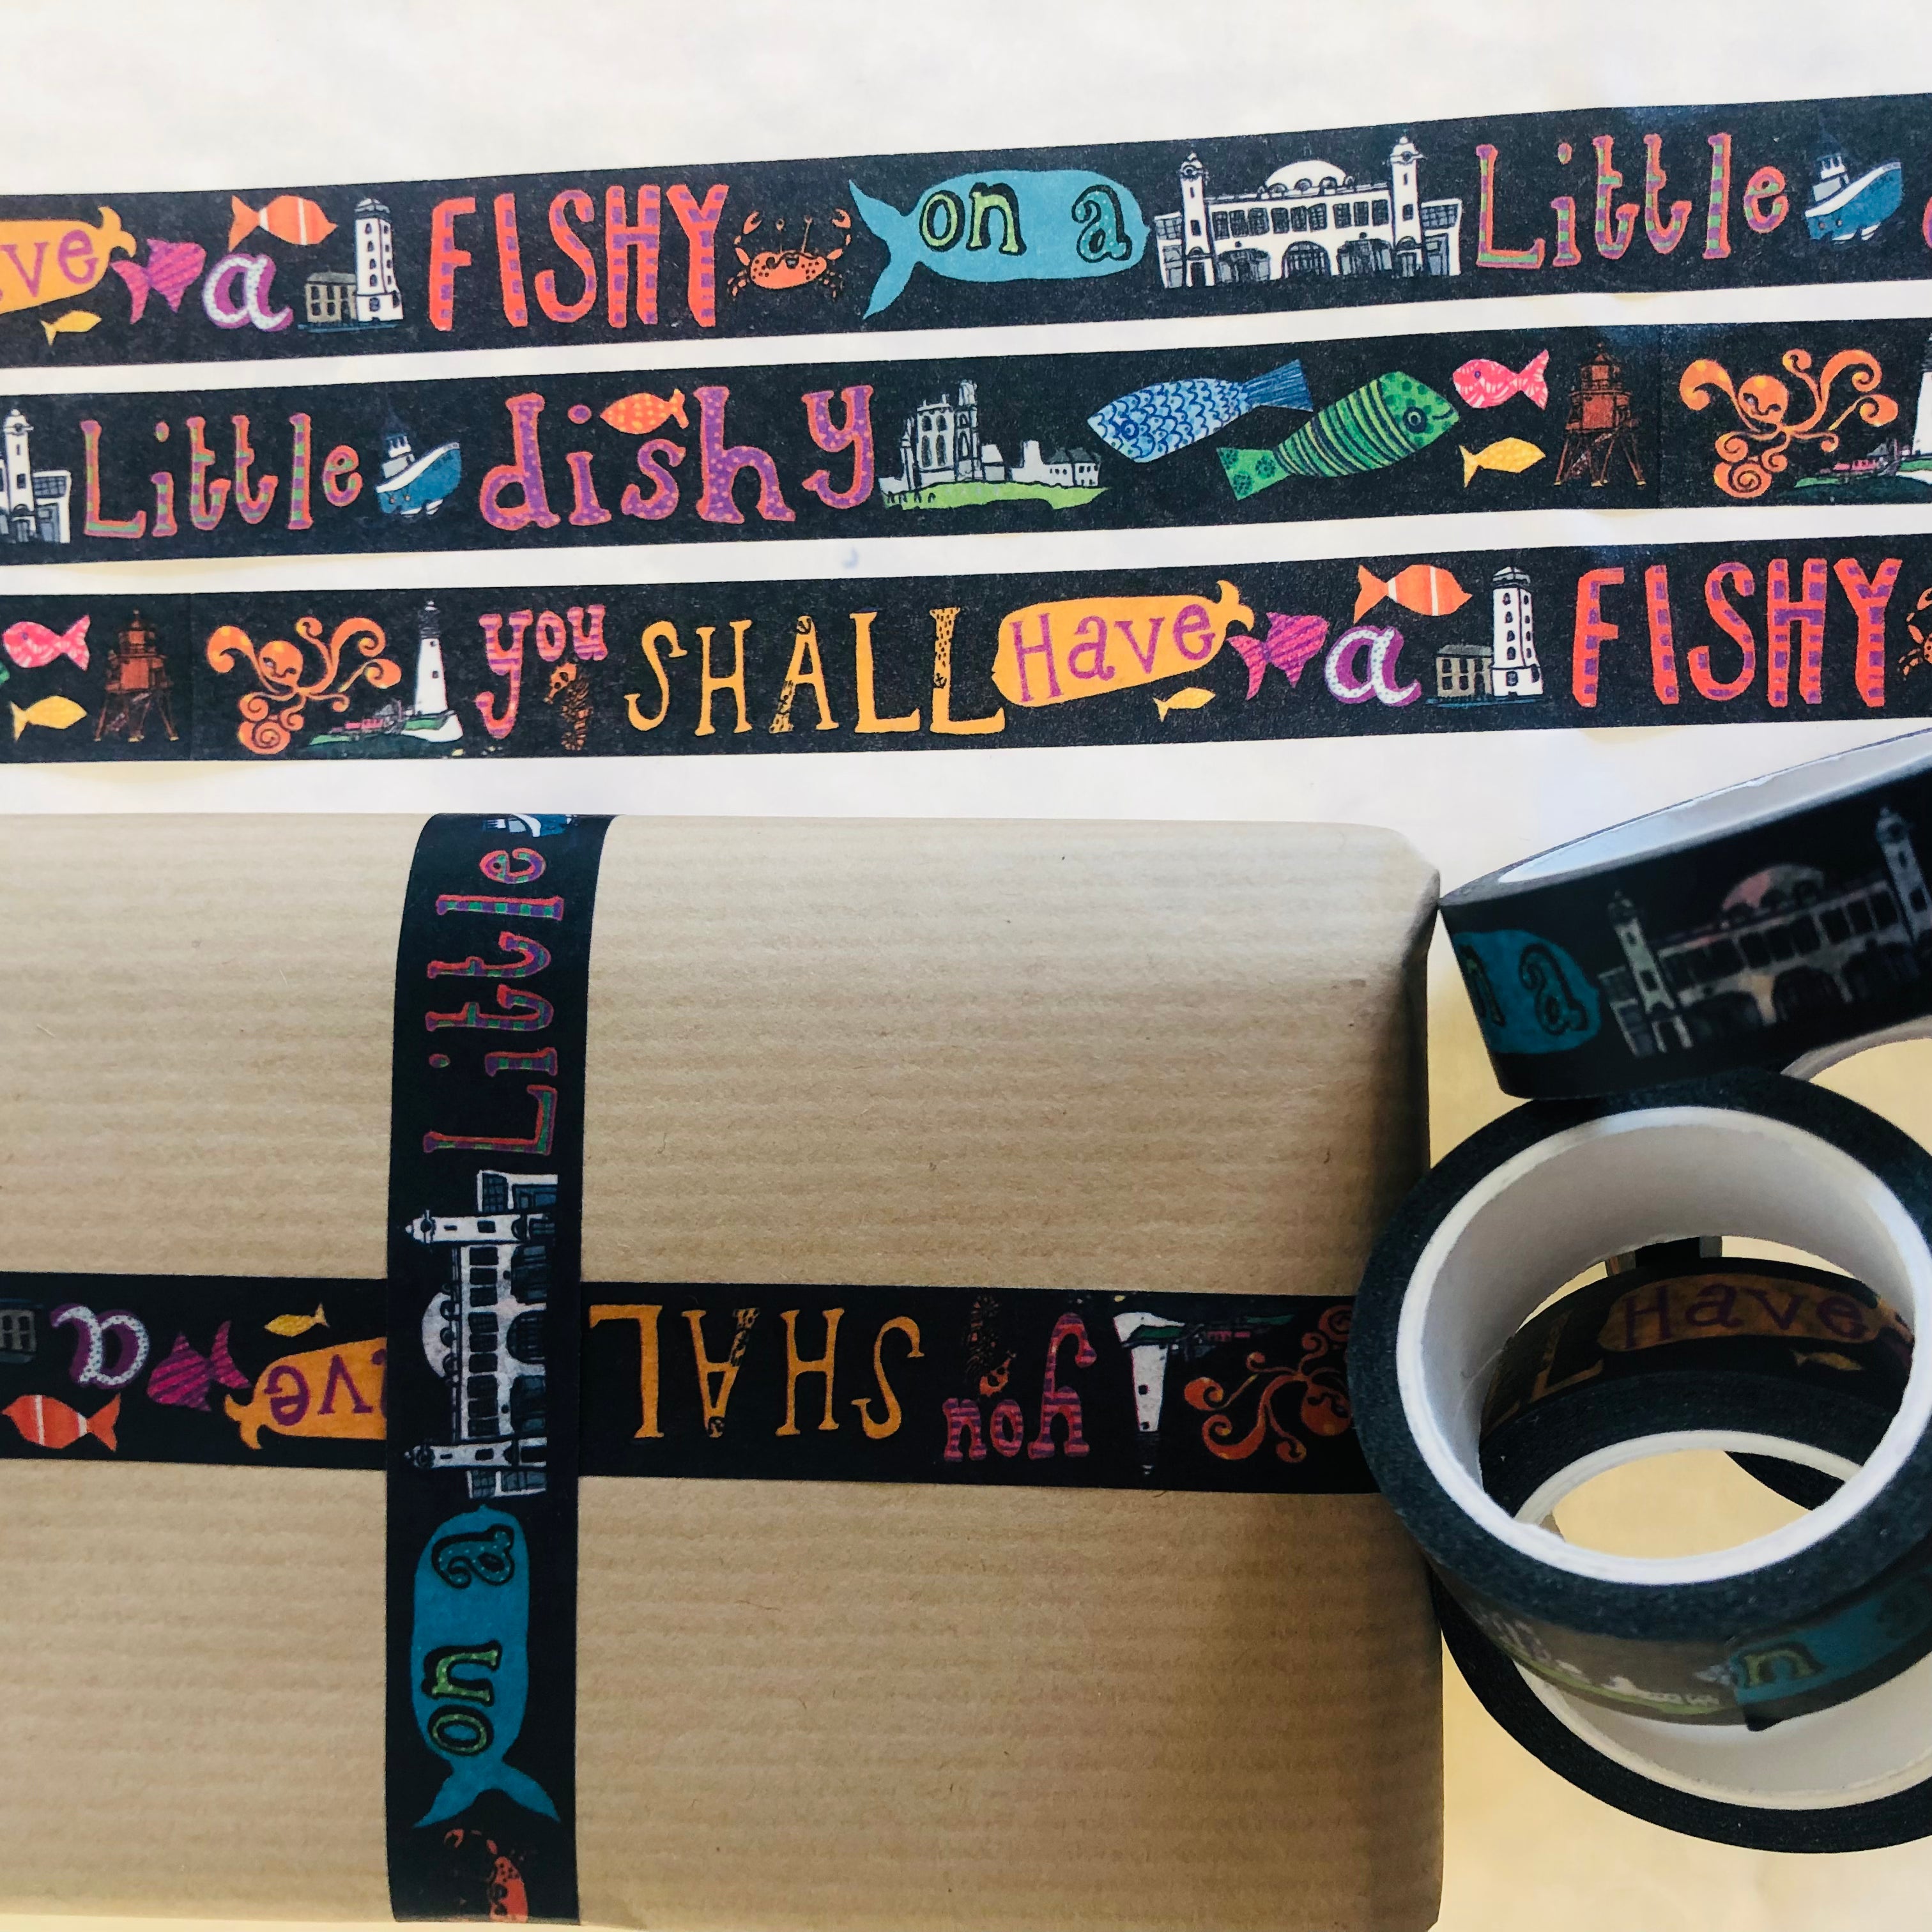 You Shall Have a Fishy on A Little Dishy Washi Tape